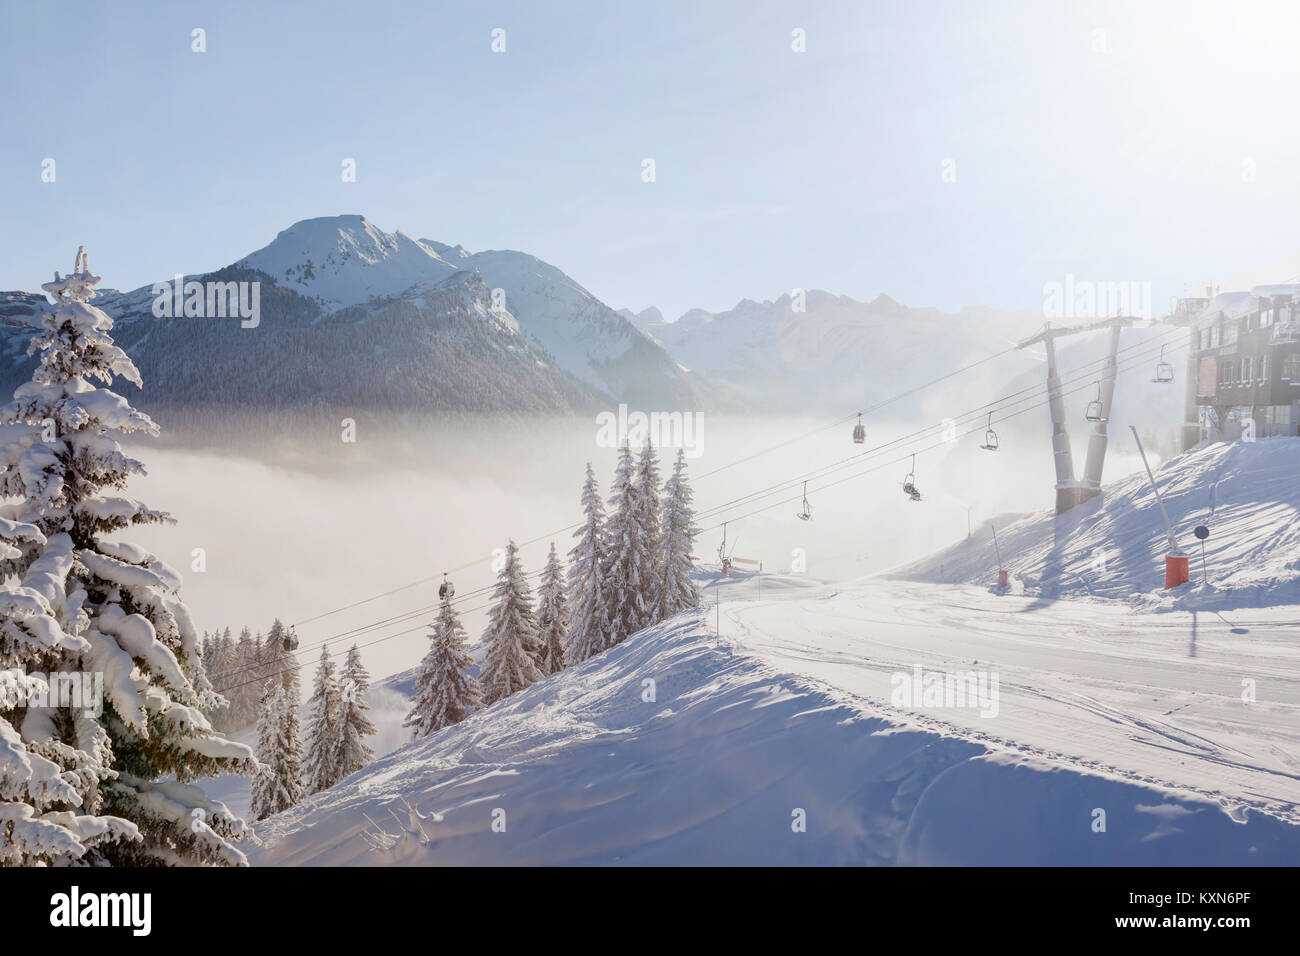 Morning view of Morzine ski resort with snow covered trees, groomed piste, ski lifts and misty mountains in the Portes du Soleil ski area, France. Stock Photo